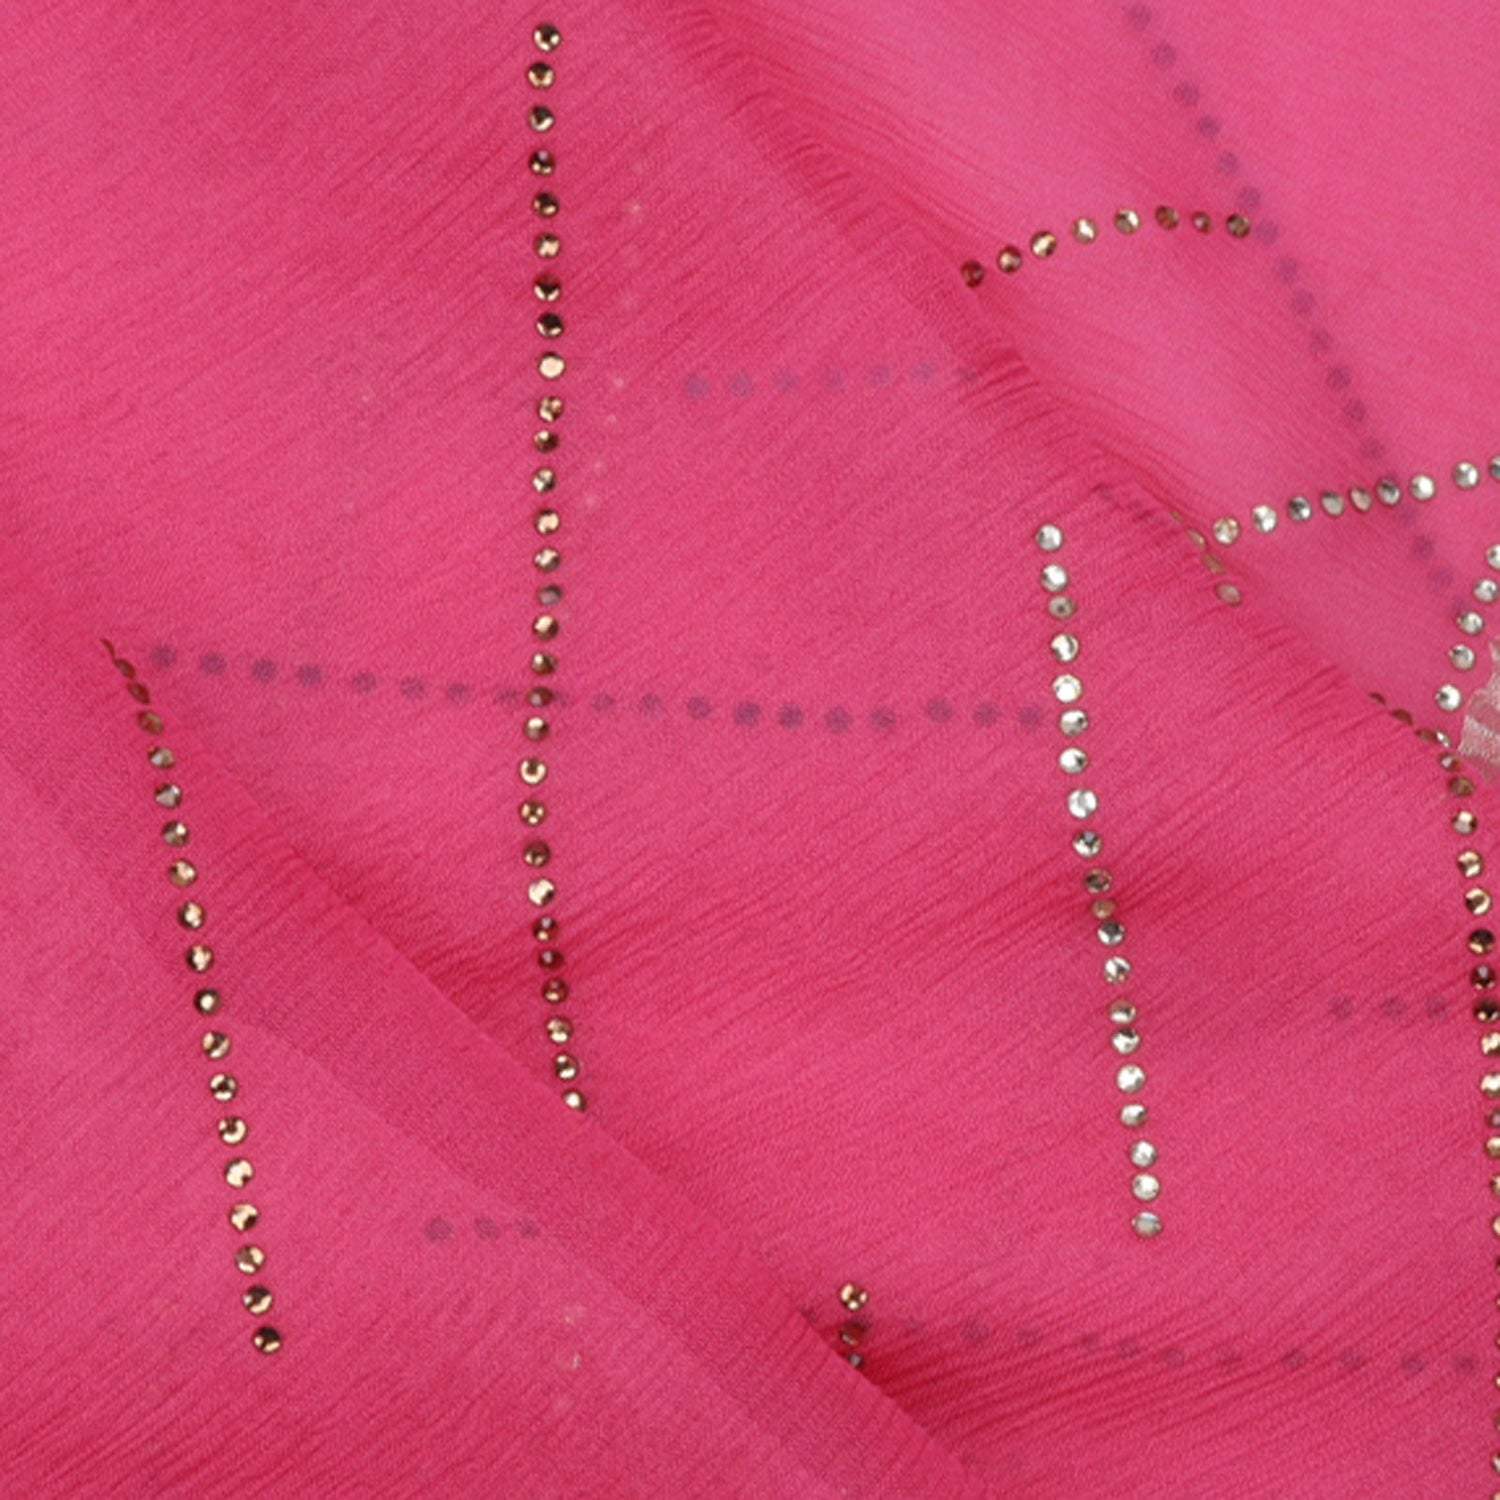 Pink Ombre Chiffon Saree With Stone Embroidery - Singhania's